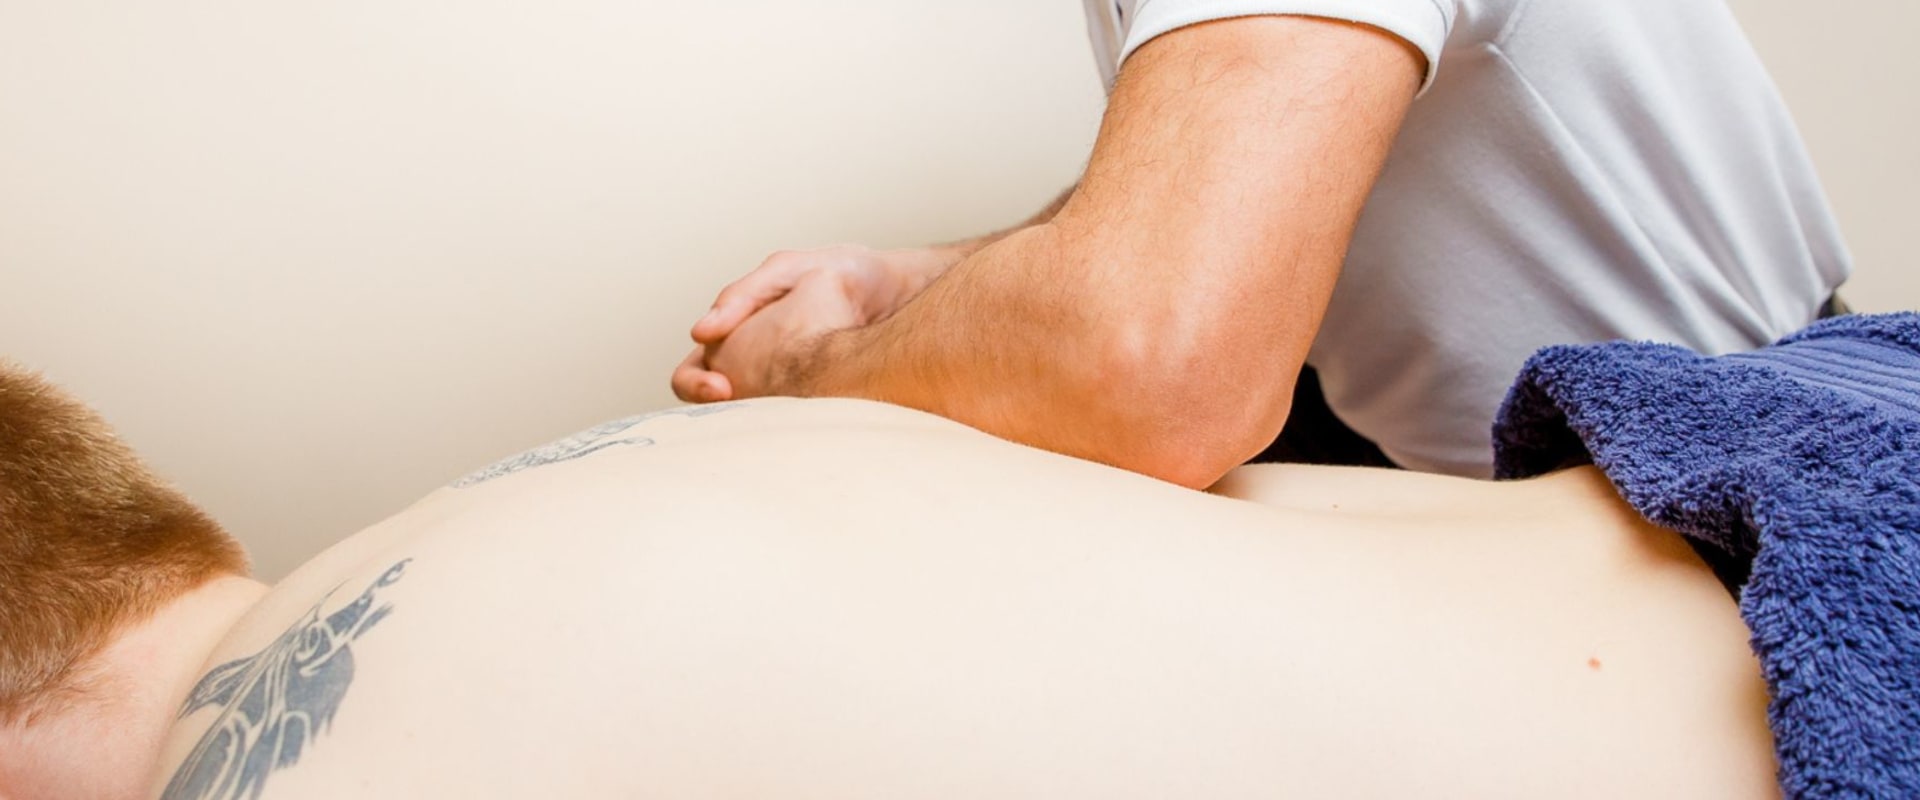 What not to do from a deep tissue massage in Austin TX